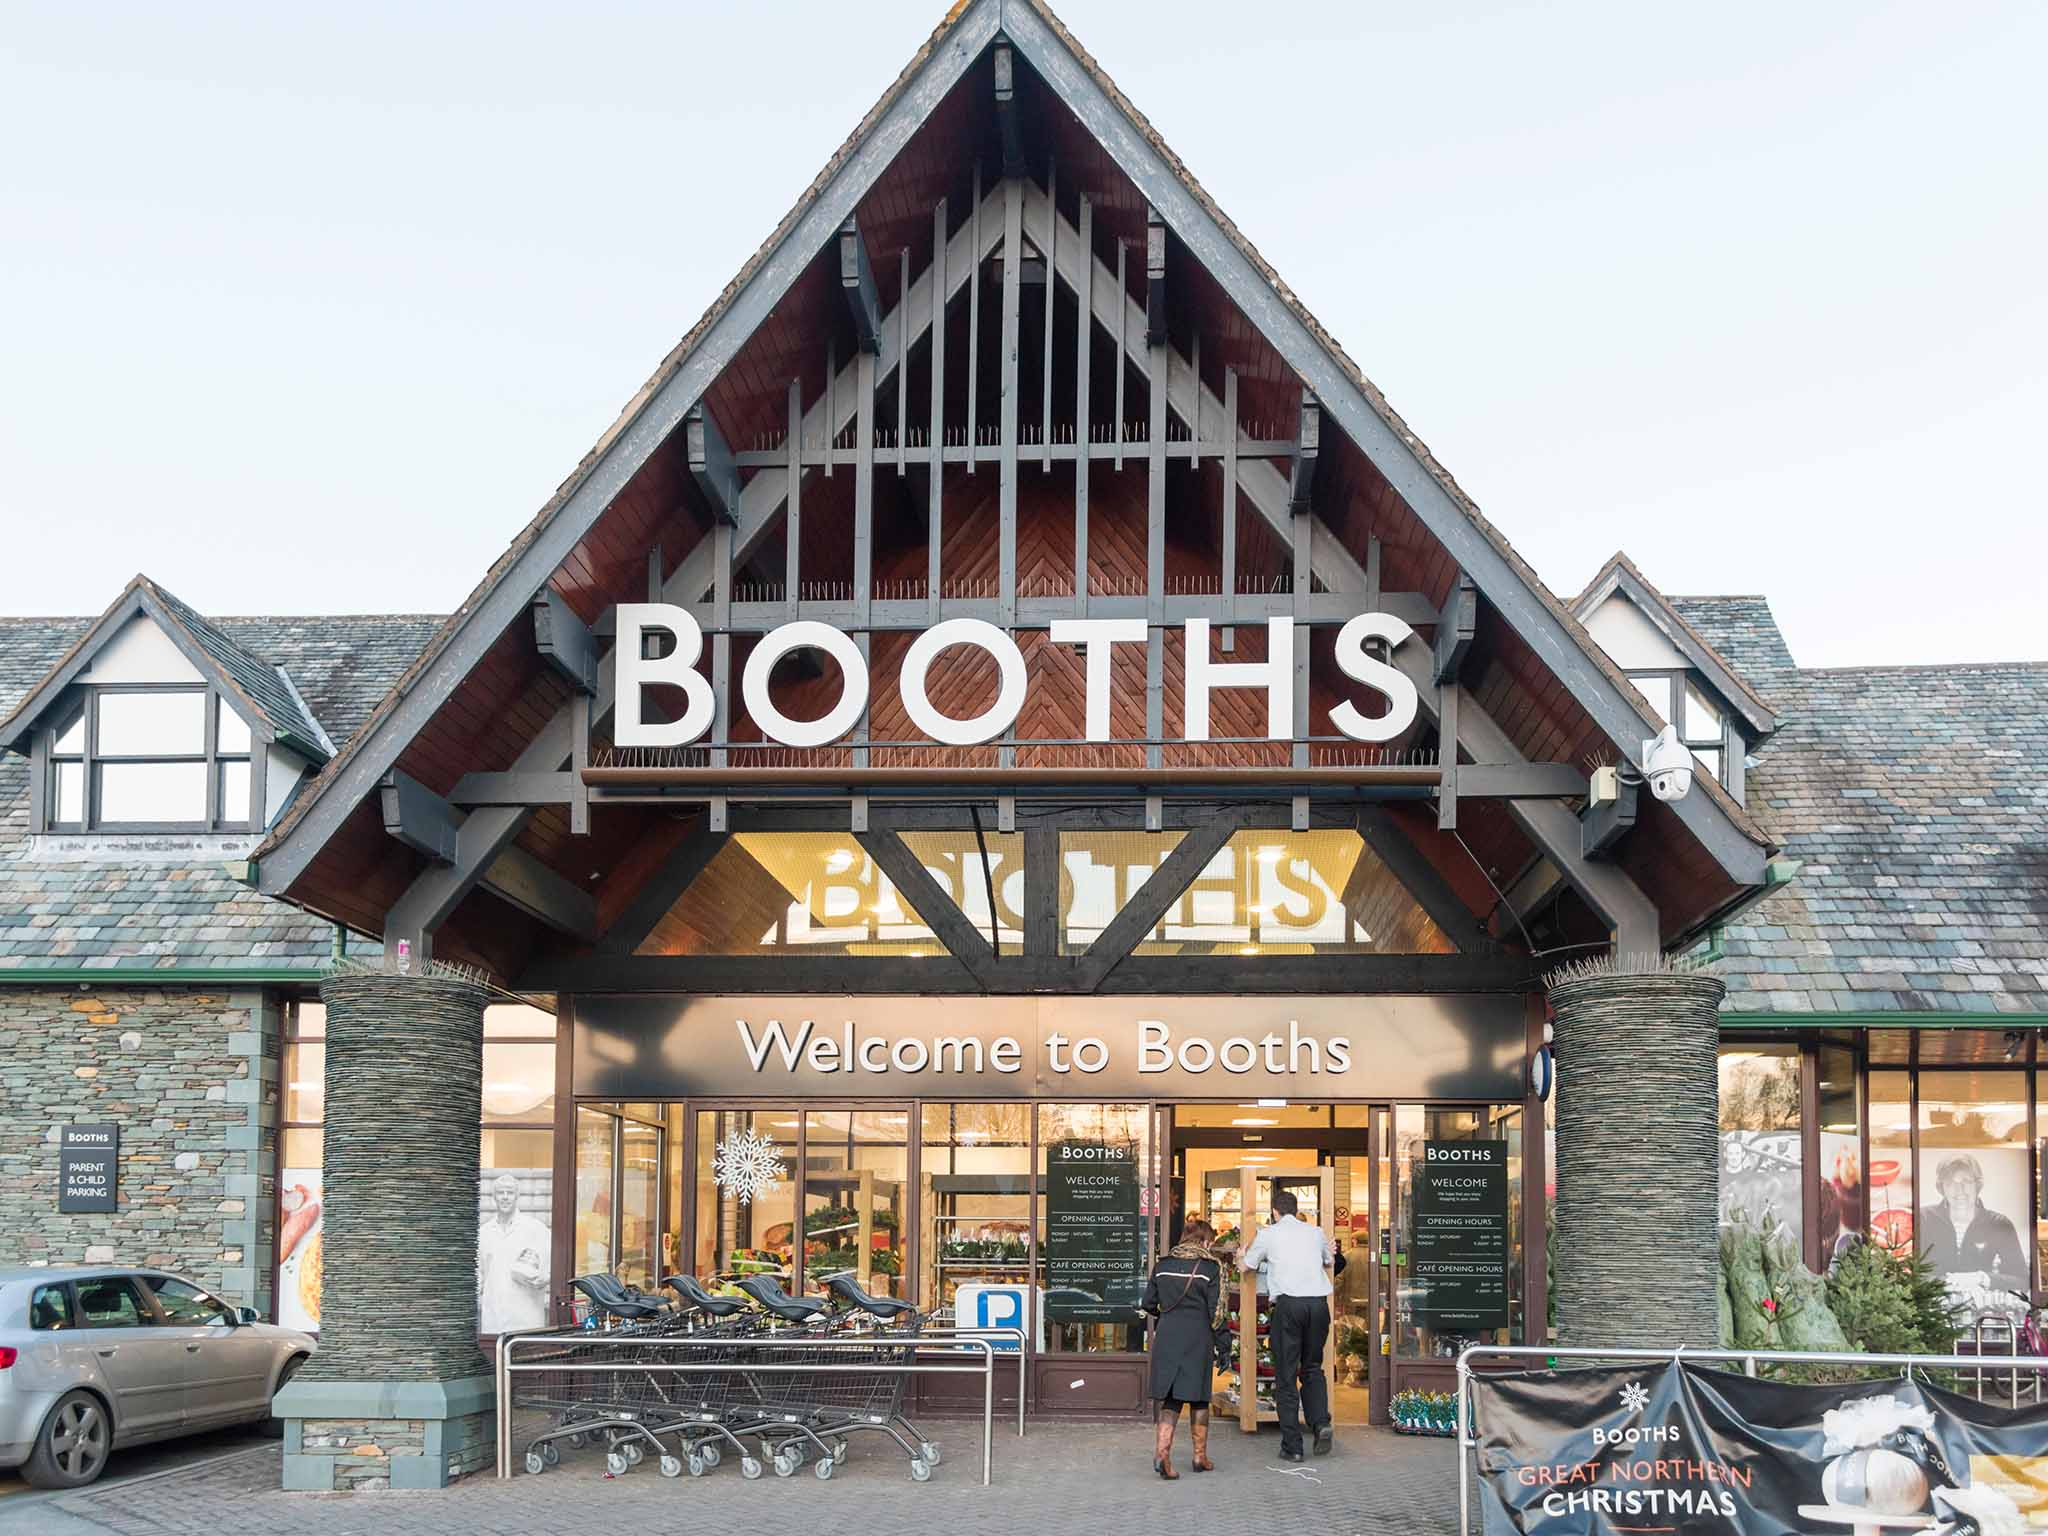 Booths has been dubbed ‘the Waitrose of the North’ – except, it really isn’t